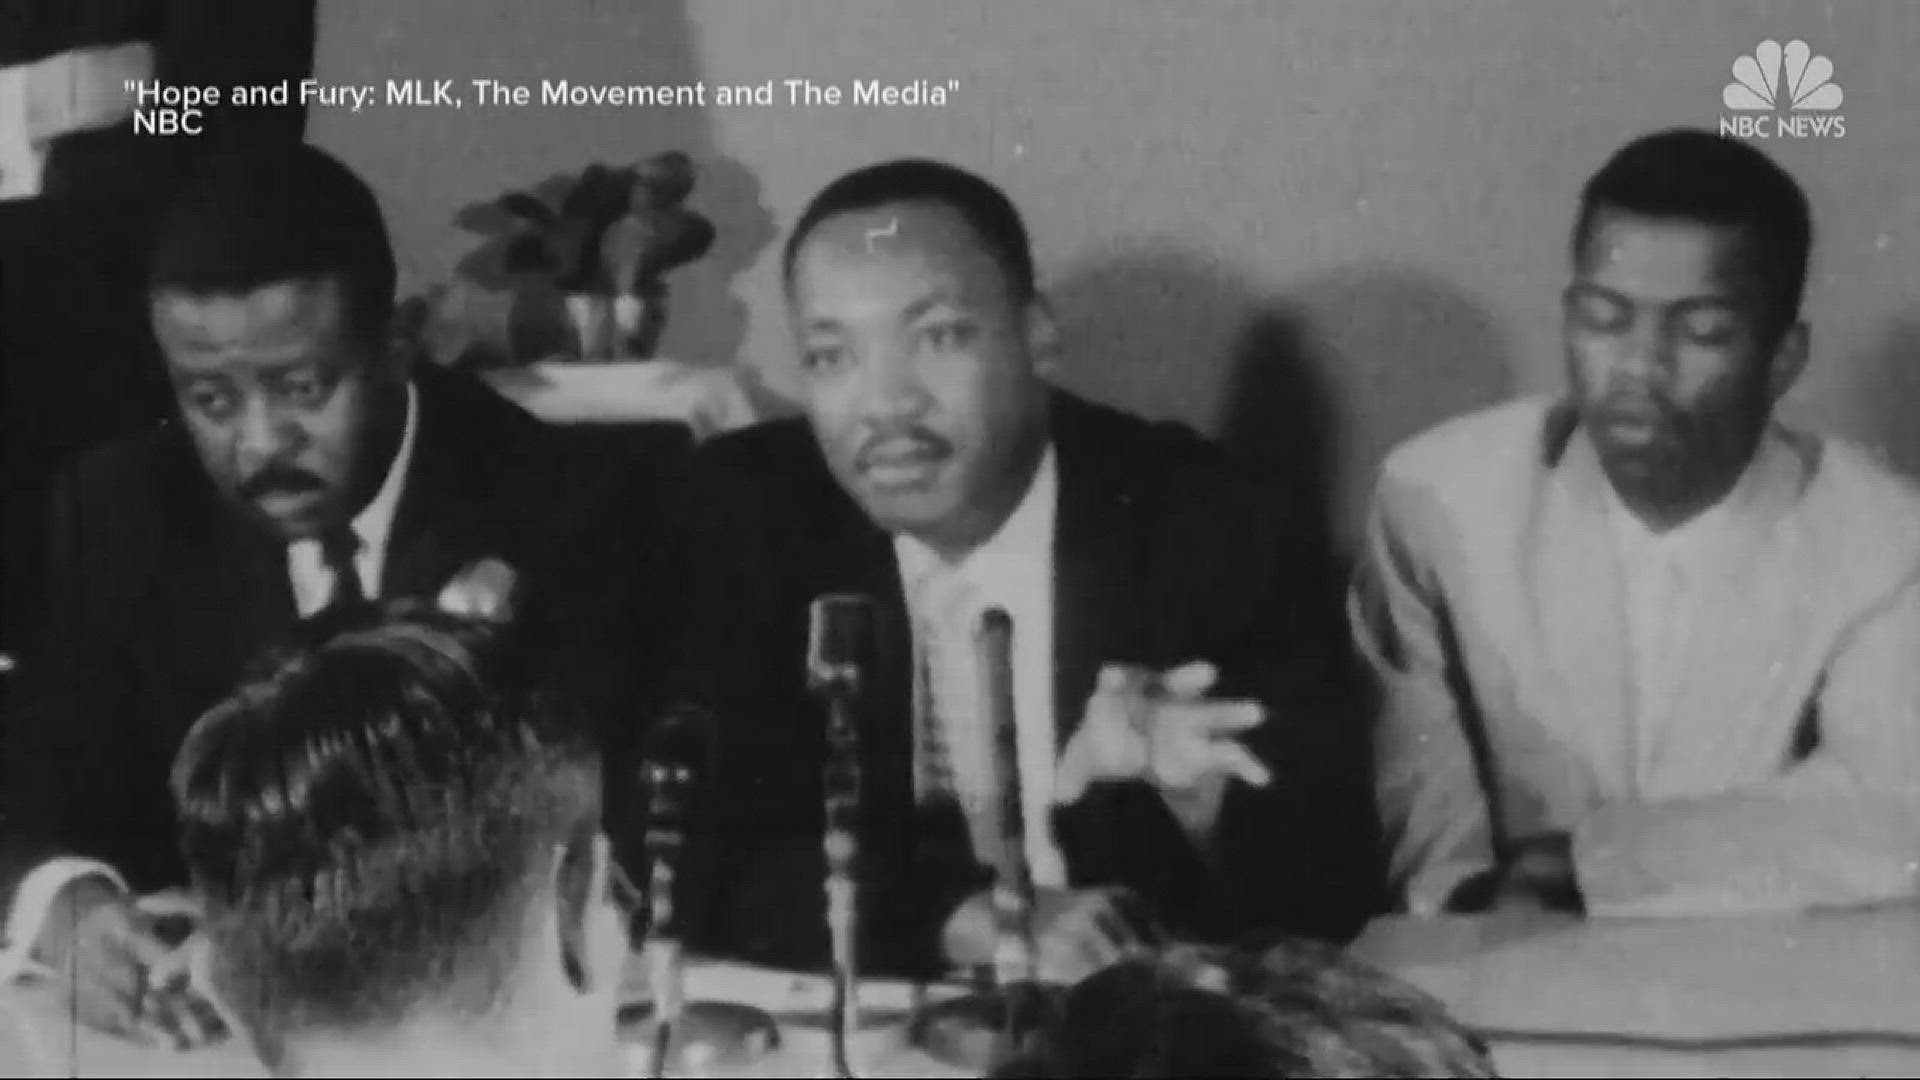 "Hope and Fury: MLK, The Movement and The Media", a two-hour documentary anchored by Lester Holt, airs Saturday ahead of the 50th anniversary of Dr. King's assassination.